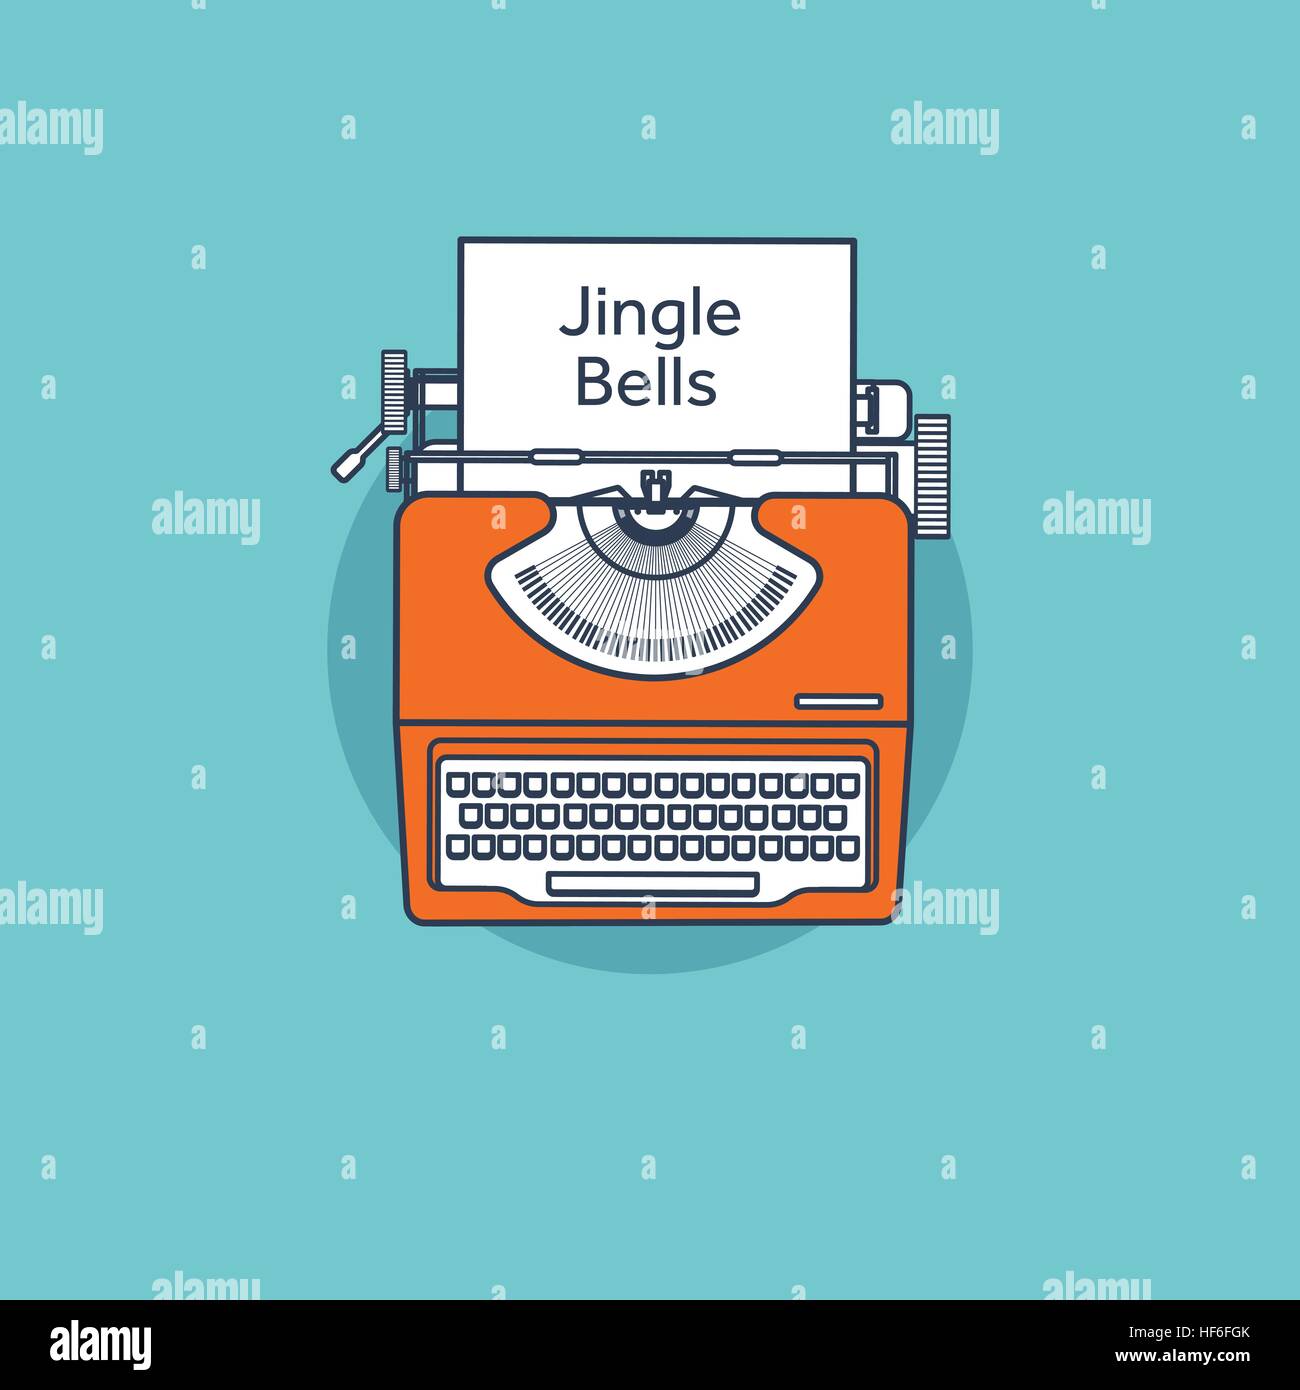 Typewriter in a flat style. Christmas wish list. Letter to Santa. New year. 2017. December holidays. Jingle Bells Stock Vector